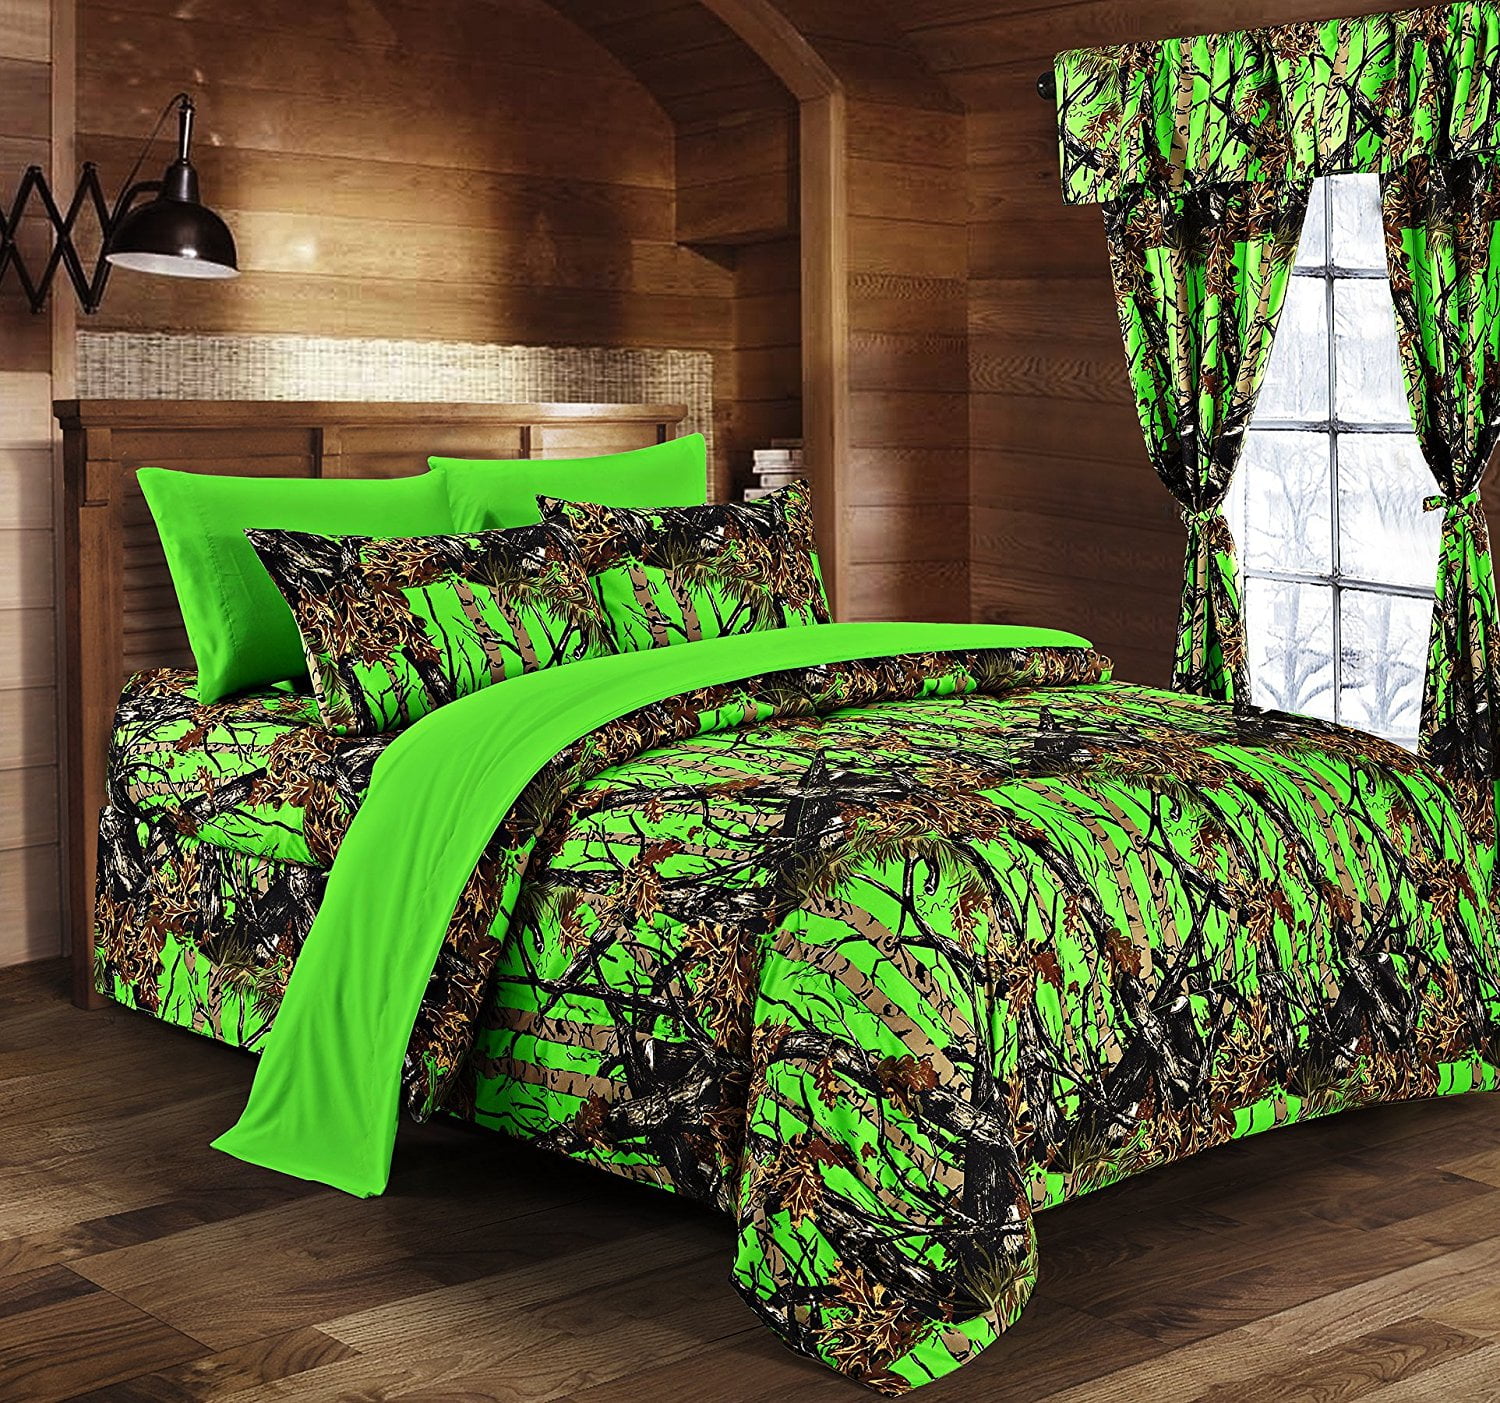 COMFORTER SHEET CURTAIN CAMOUFLAGE BEDDING 12 PC BROWN CAMO CAL KING SIZE SET! 